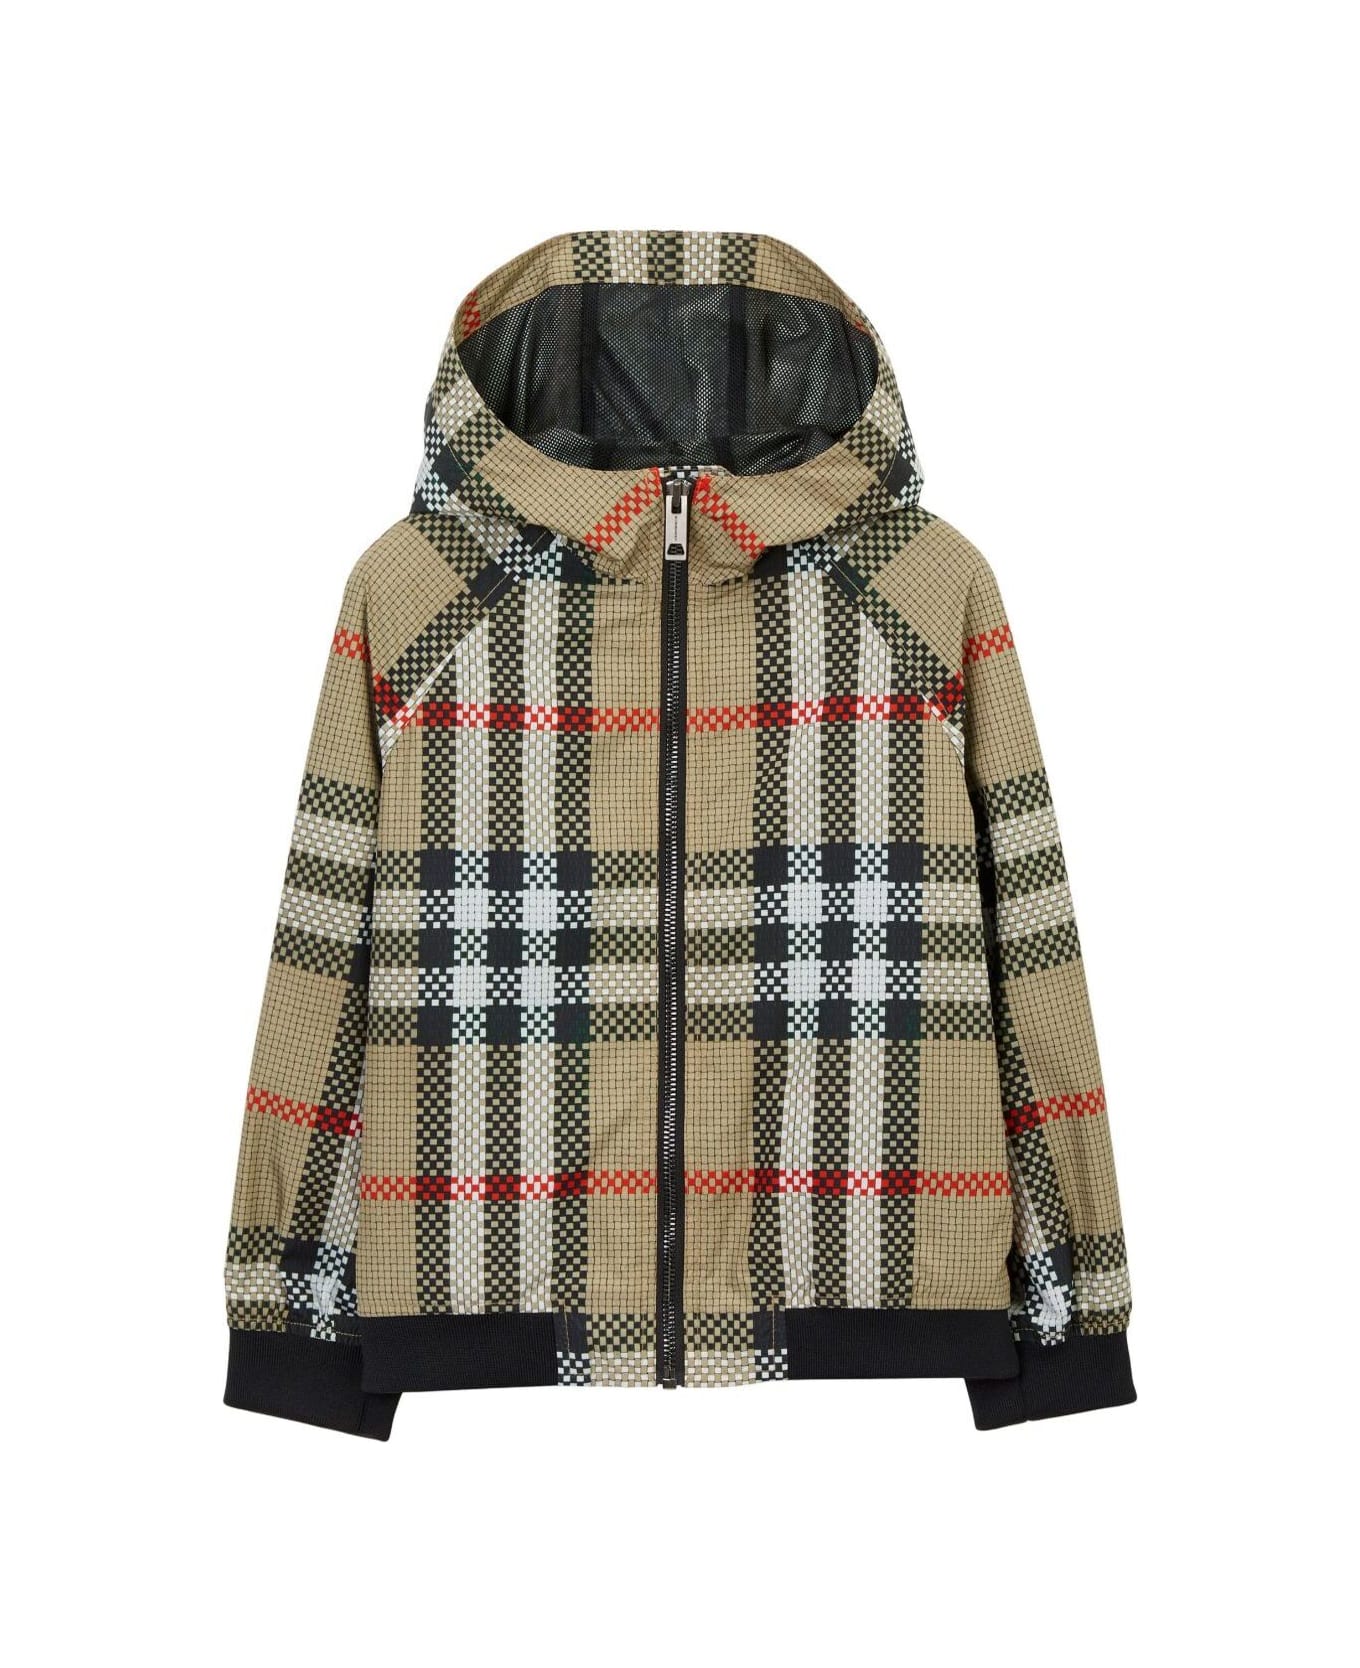 Burberry 'troy' Beige Hooded Jacket With Vintage Check Print In Nylon Boy - BEIGE